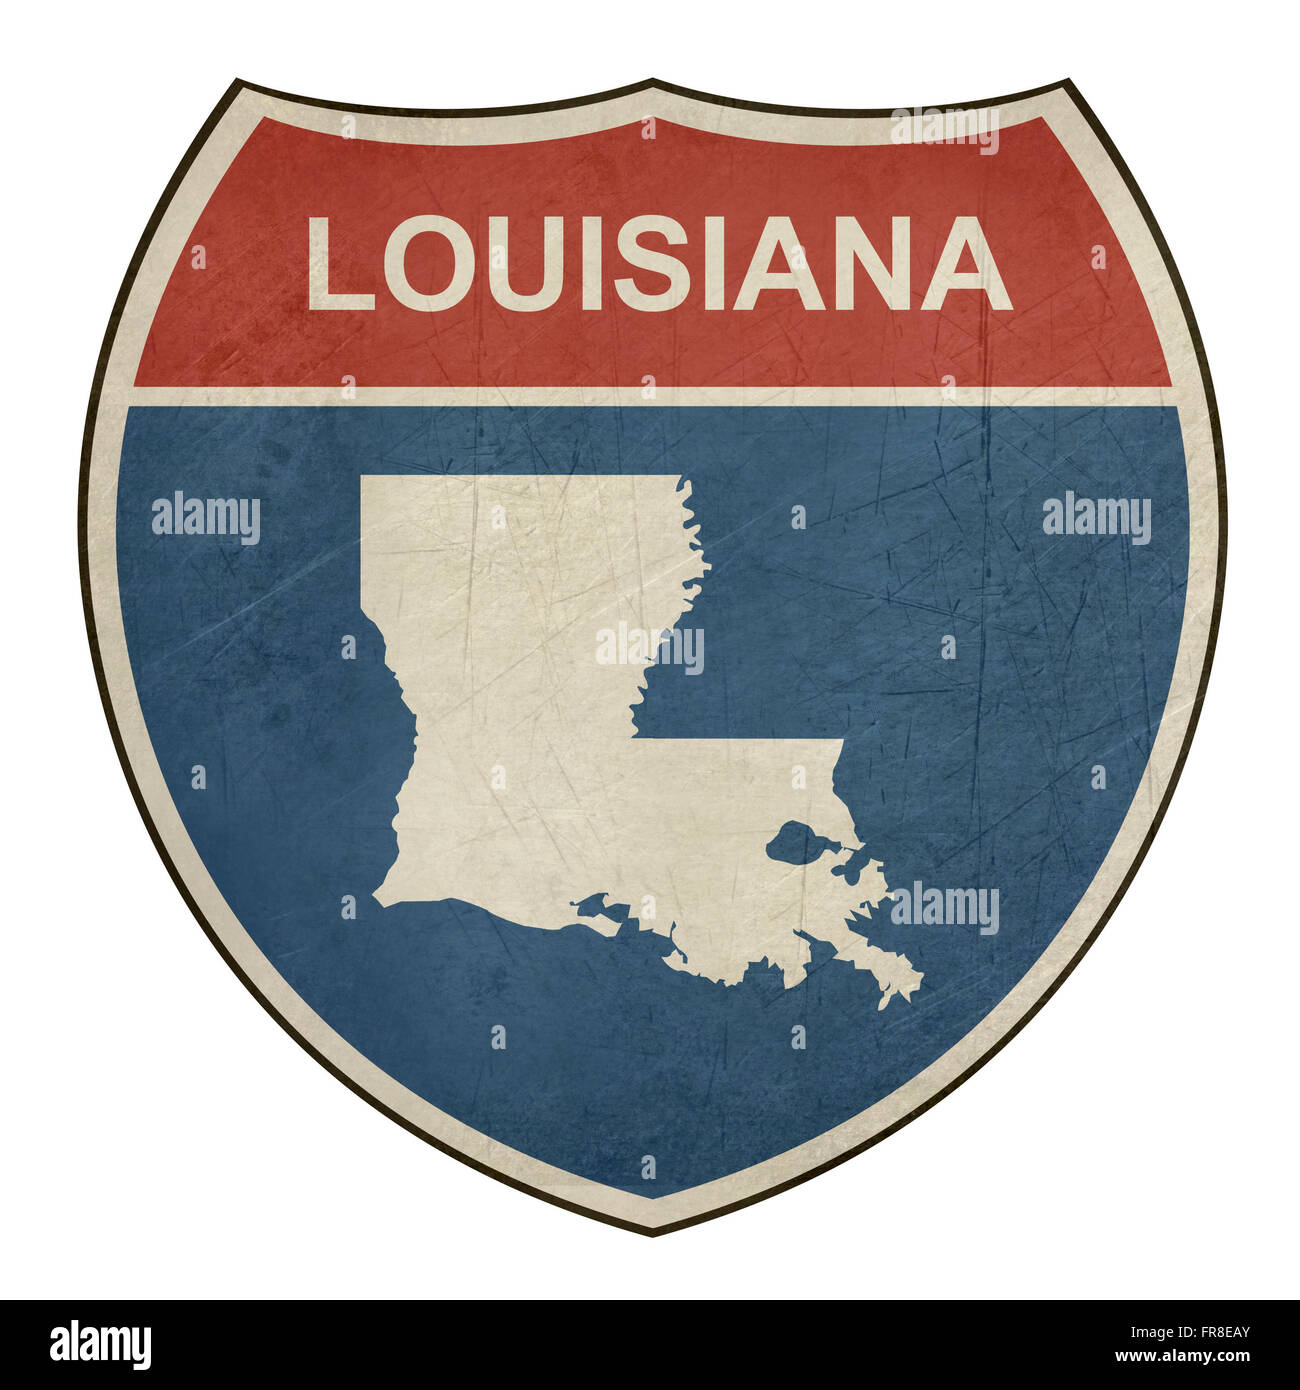 Louisiana Map On A Vintage American Flag Background Stock Photo, Picture  and Royalty Free Image. Image 36600406.